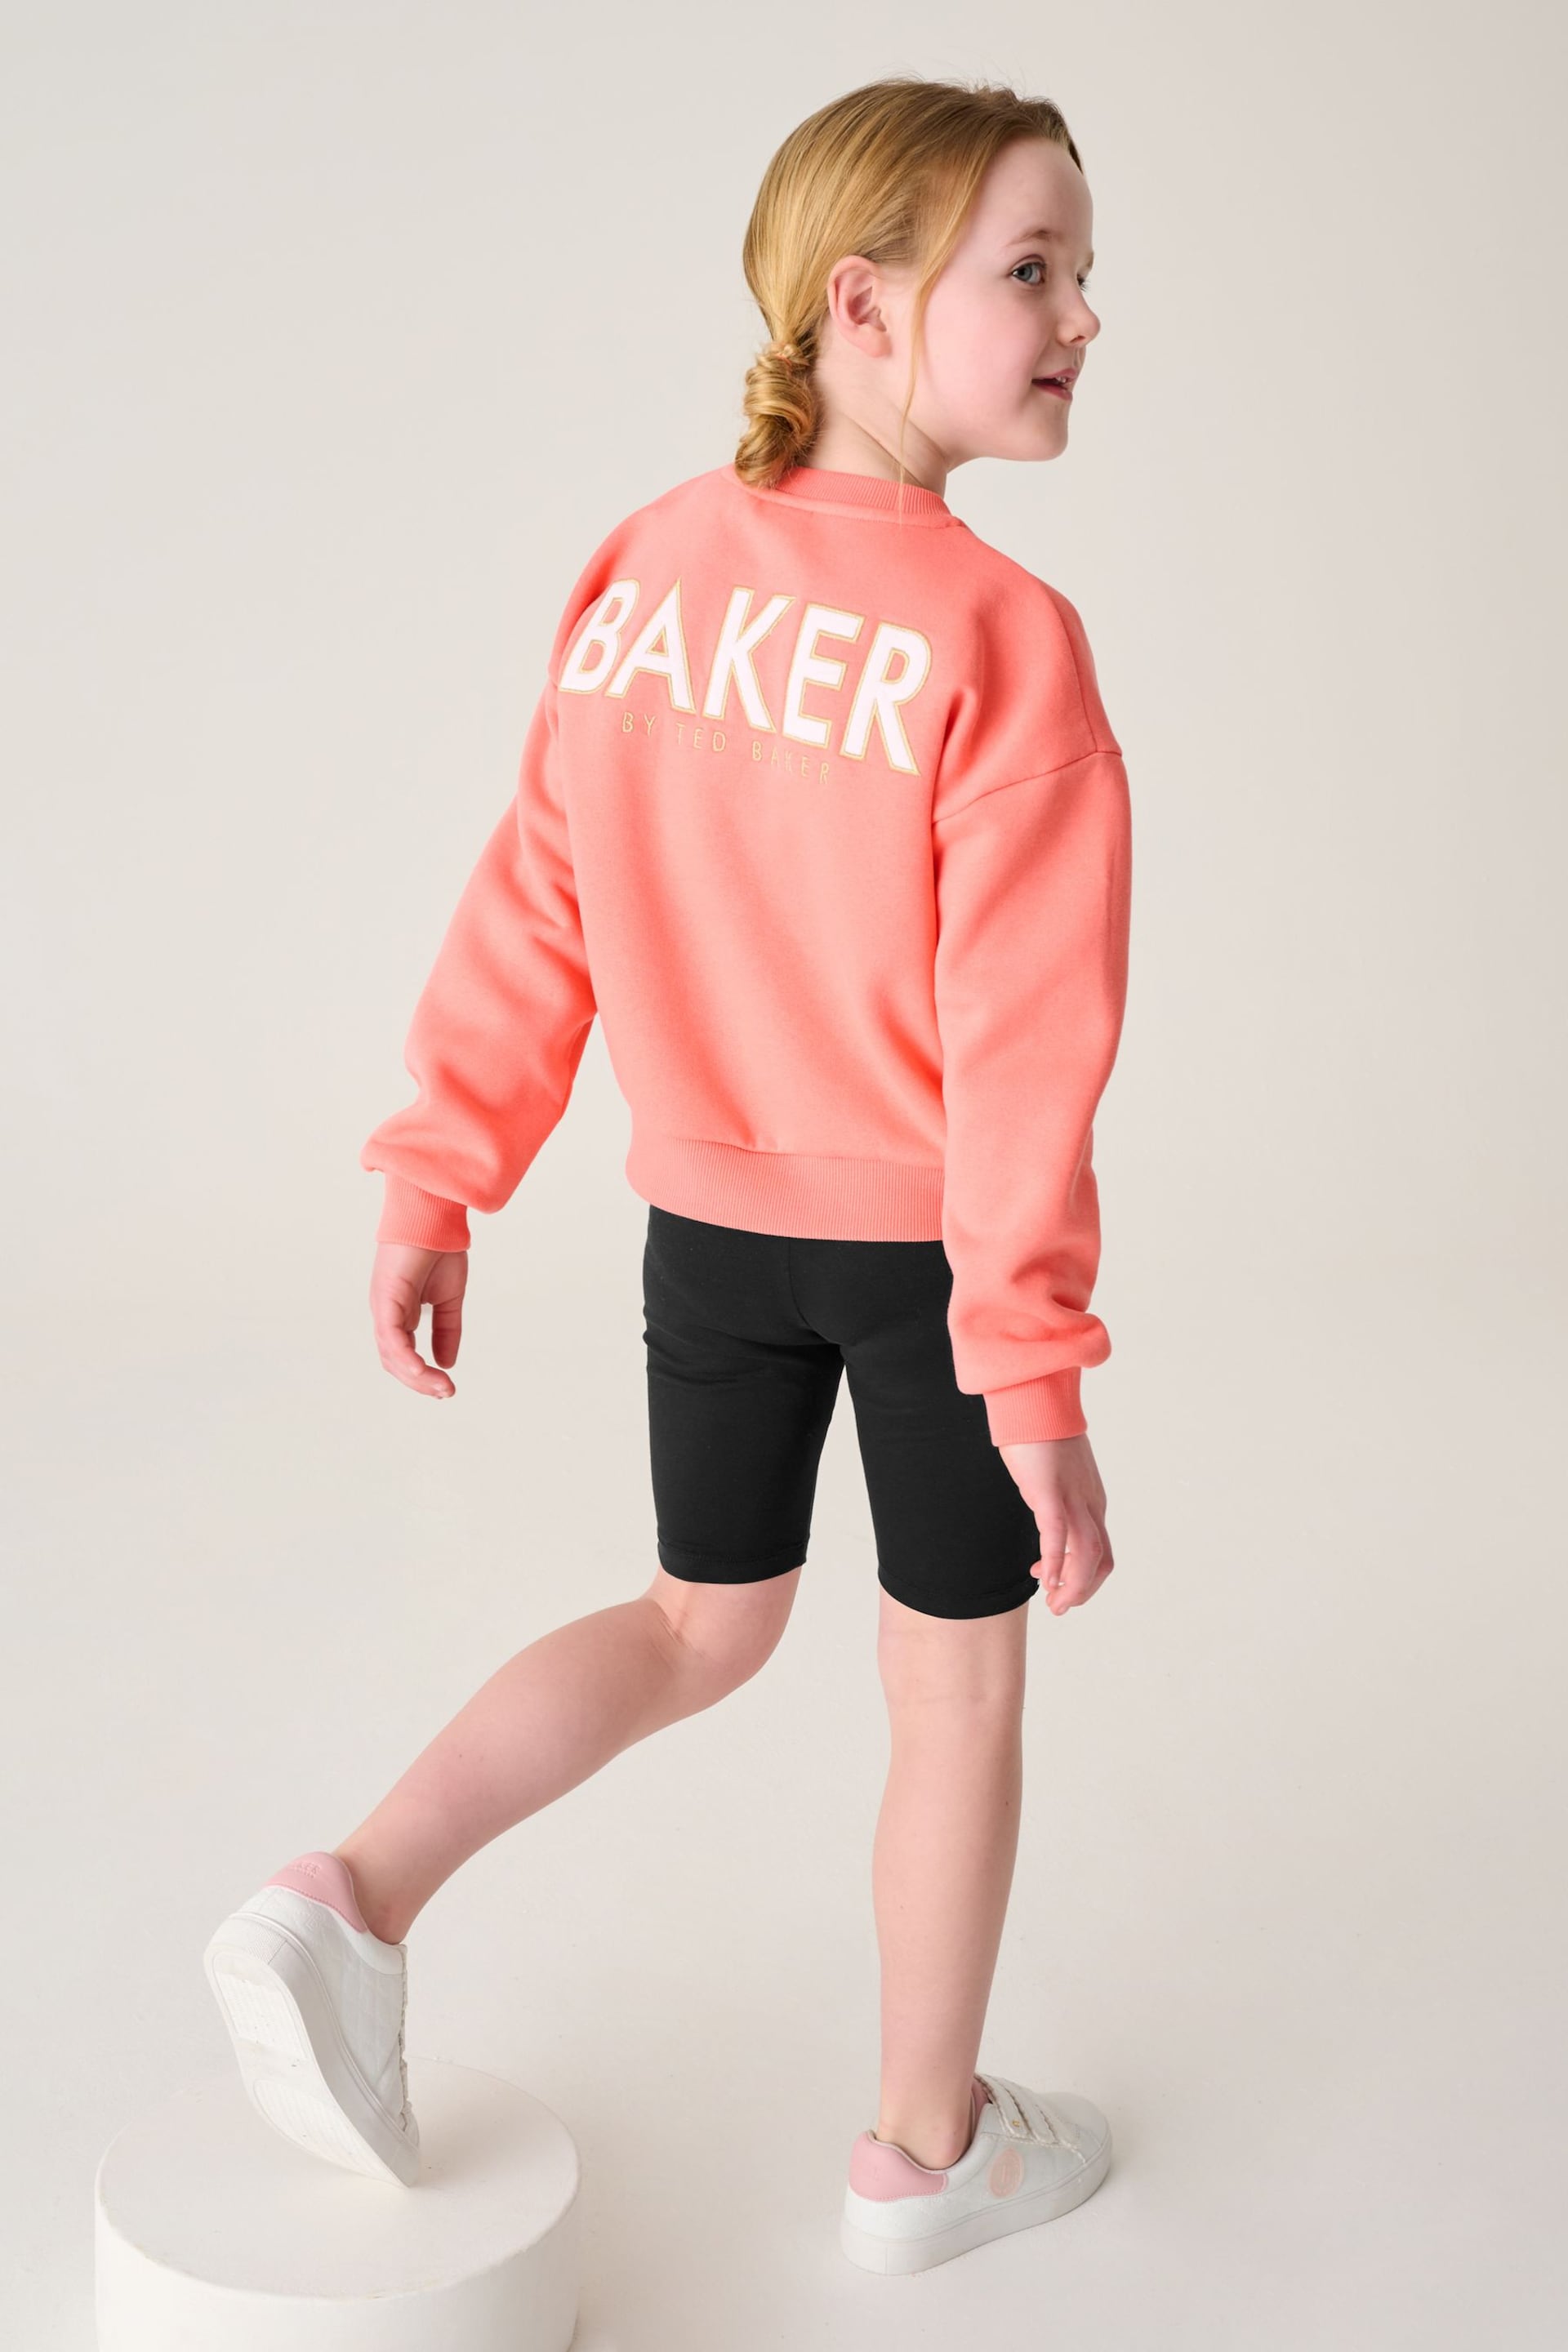 Baker by Ted Baker Apricot Sweater And Cycling Shorts Set - Image 1 of 10